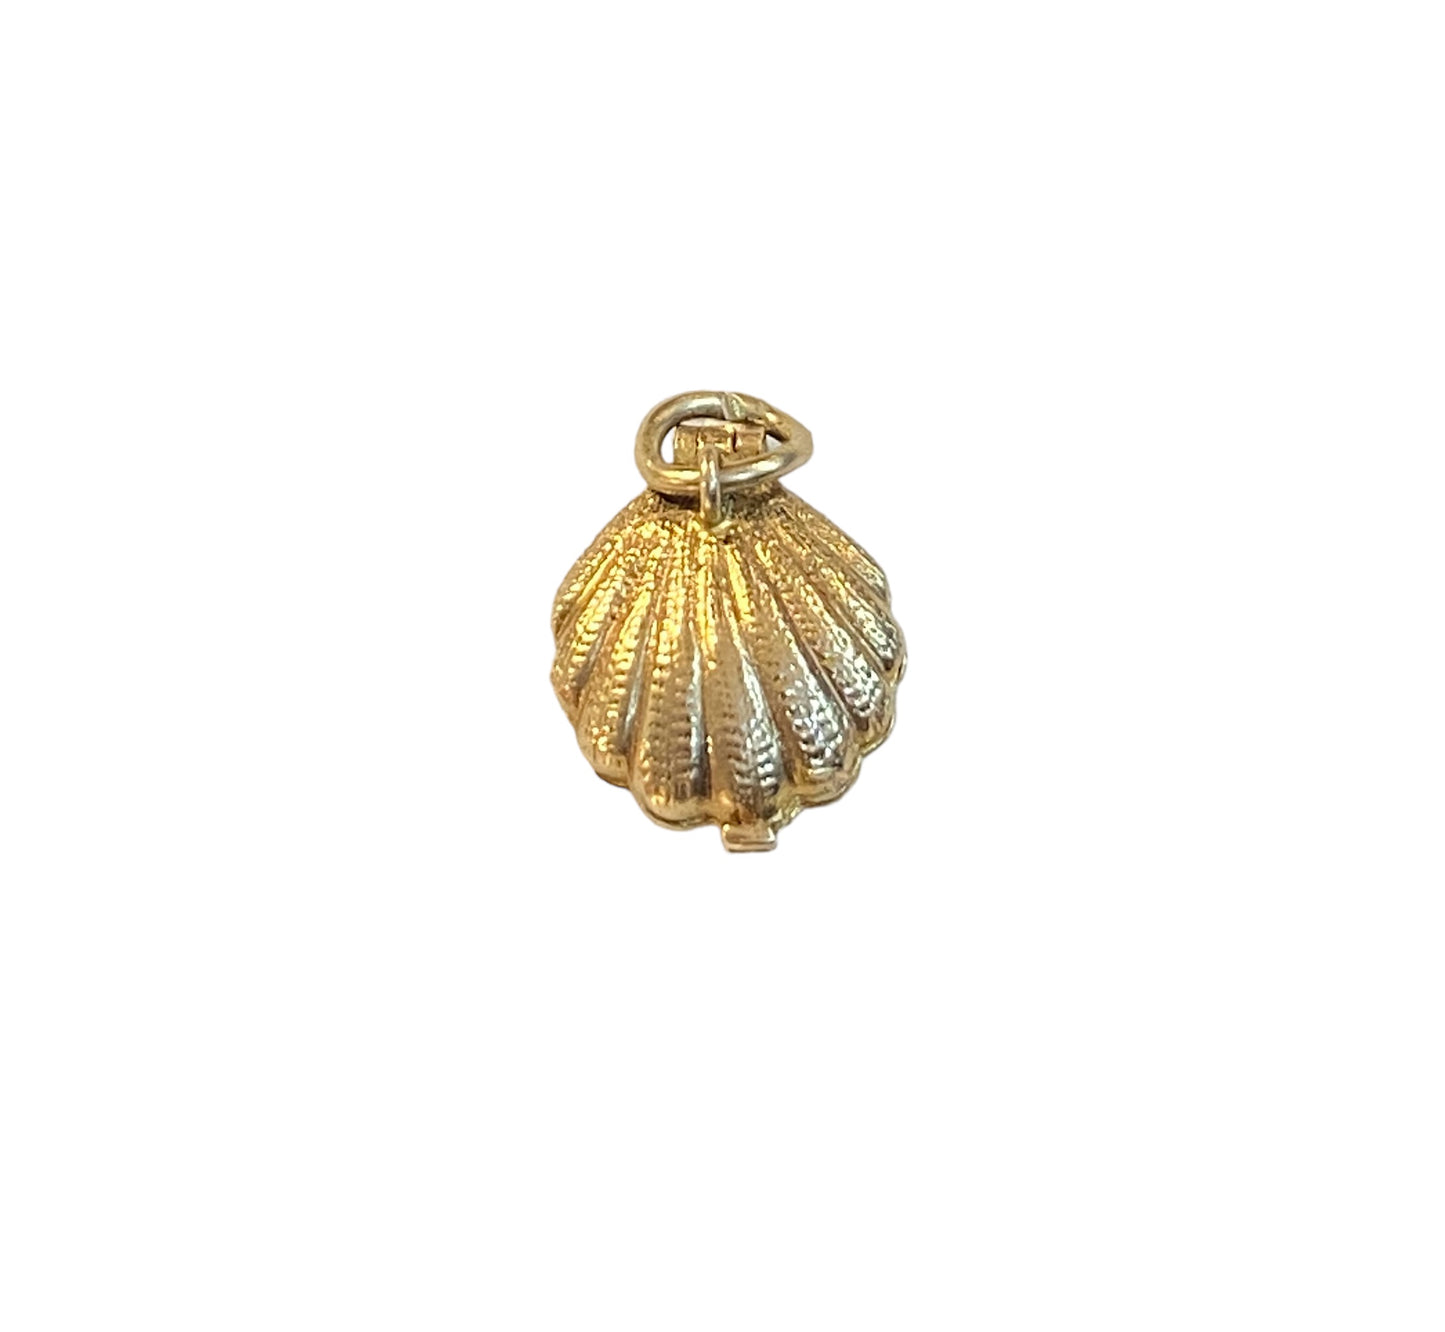 9ct 375 vintage opening oyster shell charm with pearl inside.